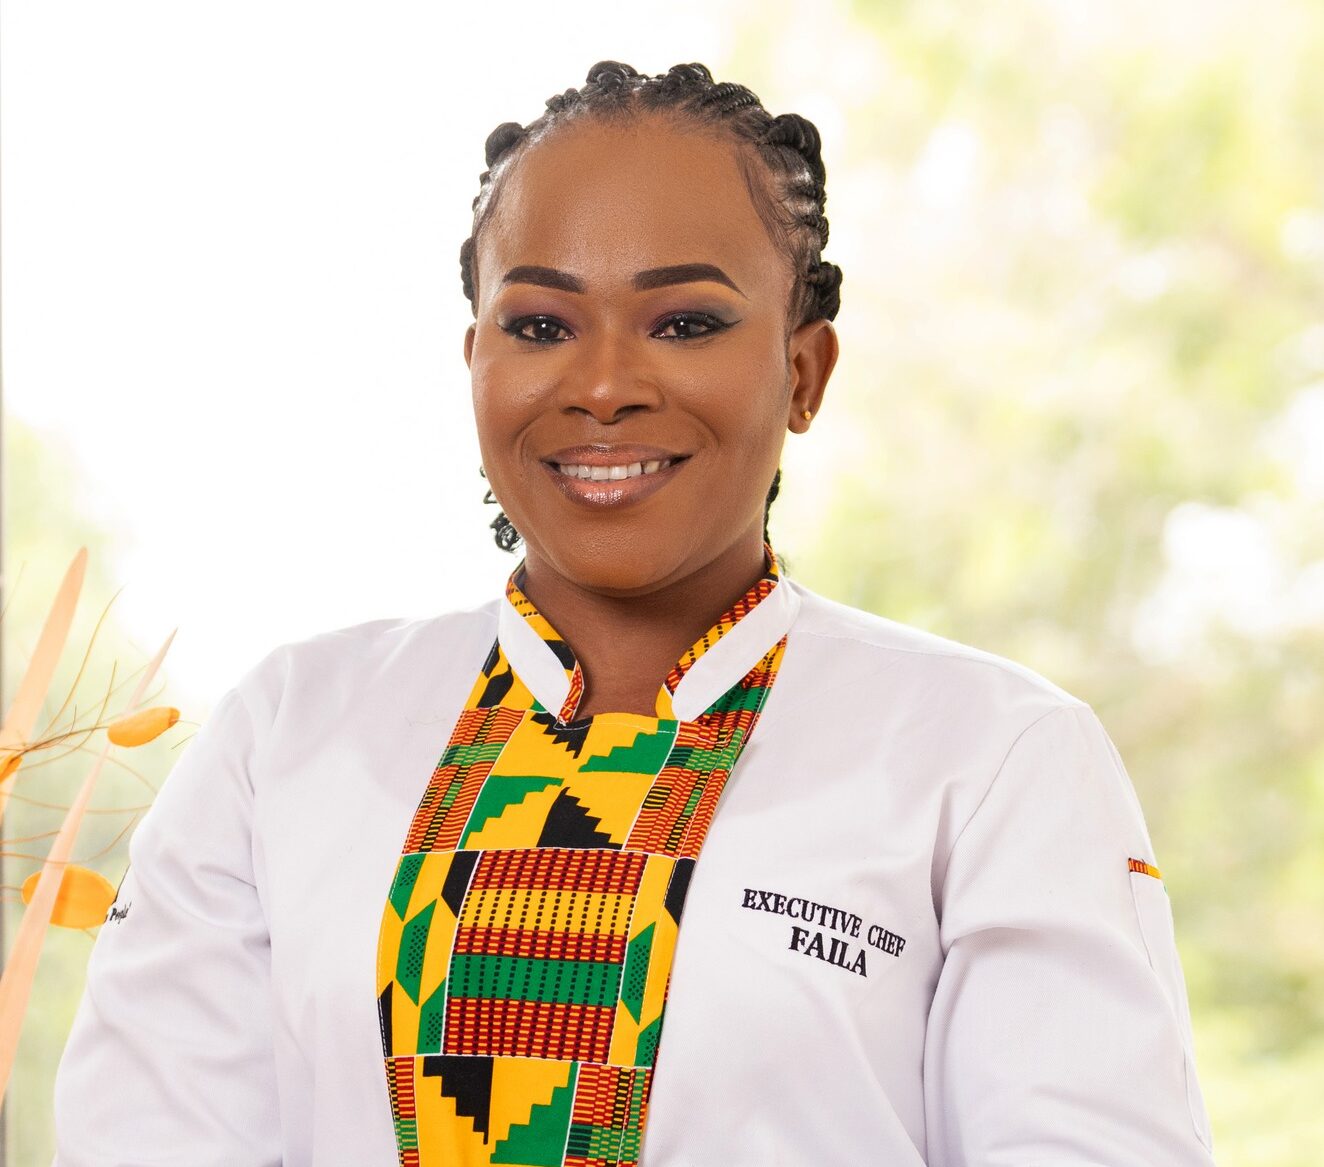 Chef Faila to represent Ghana at International Horticultural Expo in Qatar